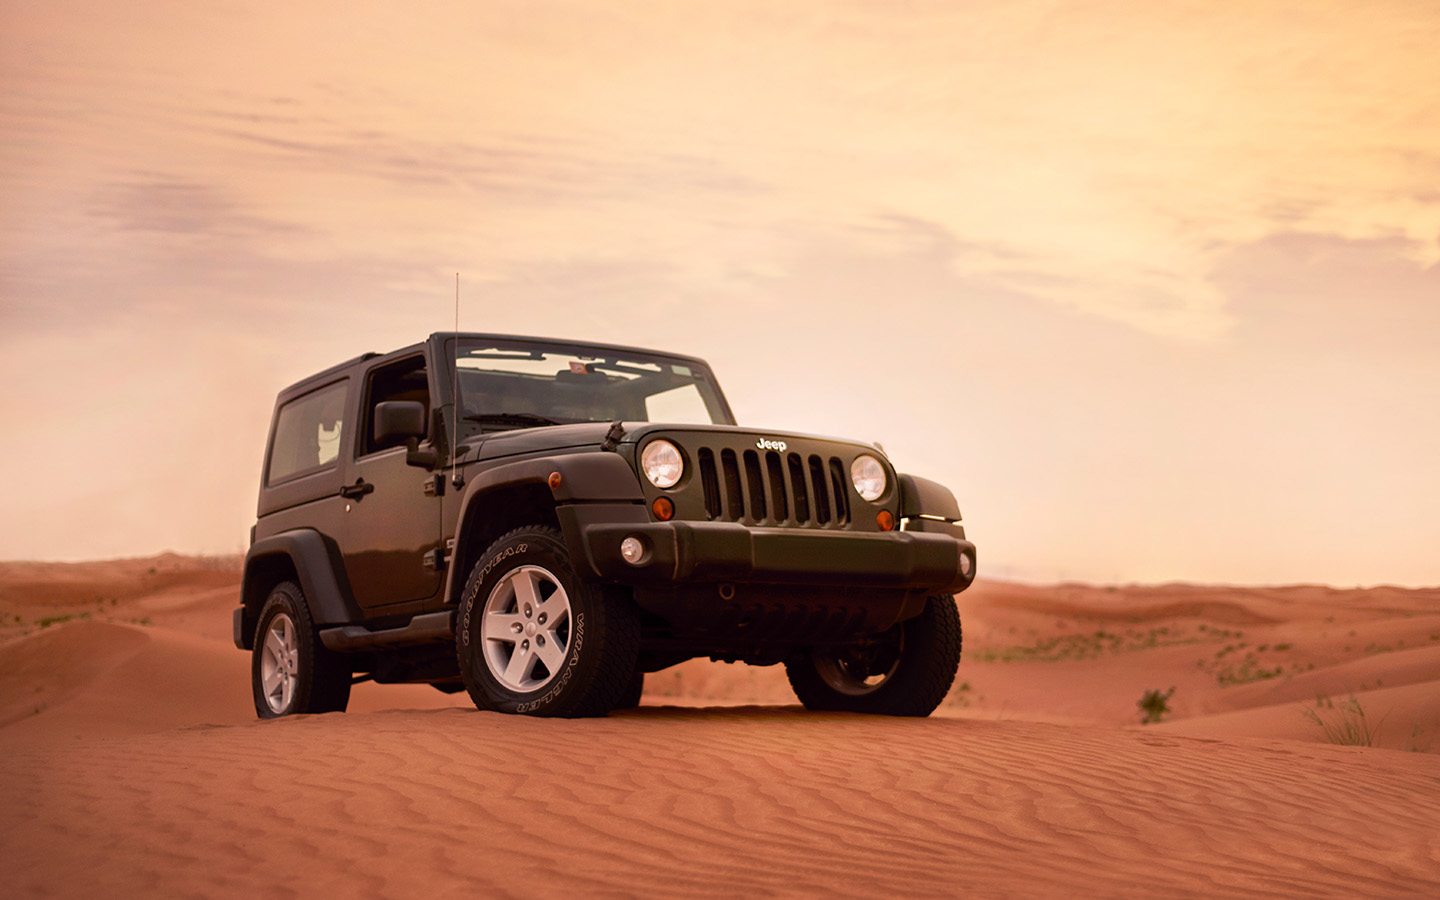 jeep is among the famous types of off-road vehcles